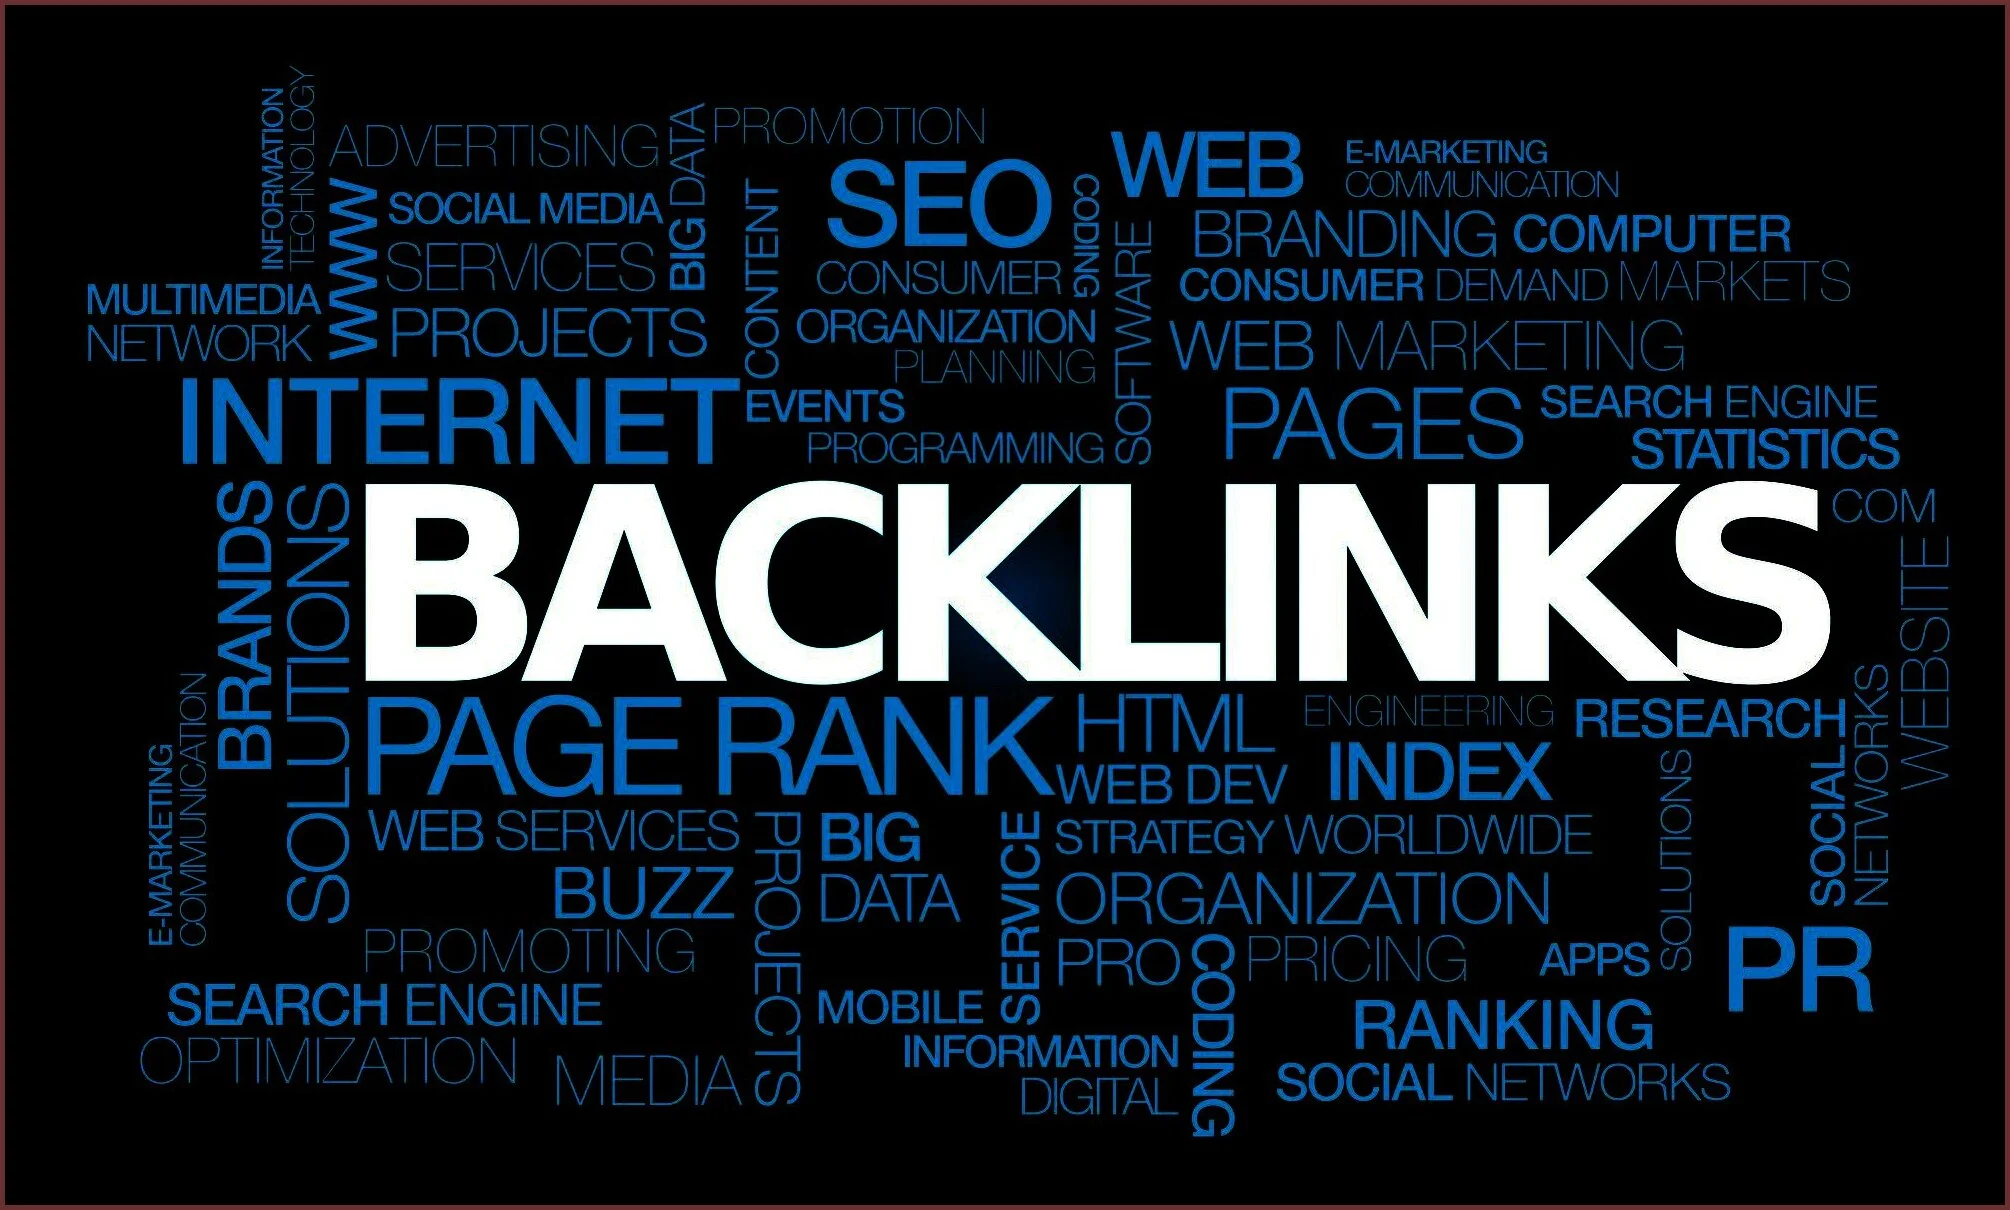 Ahrefs Backlink Site Features and Benefits